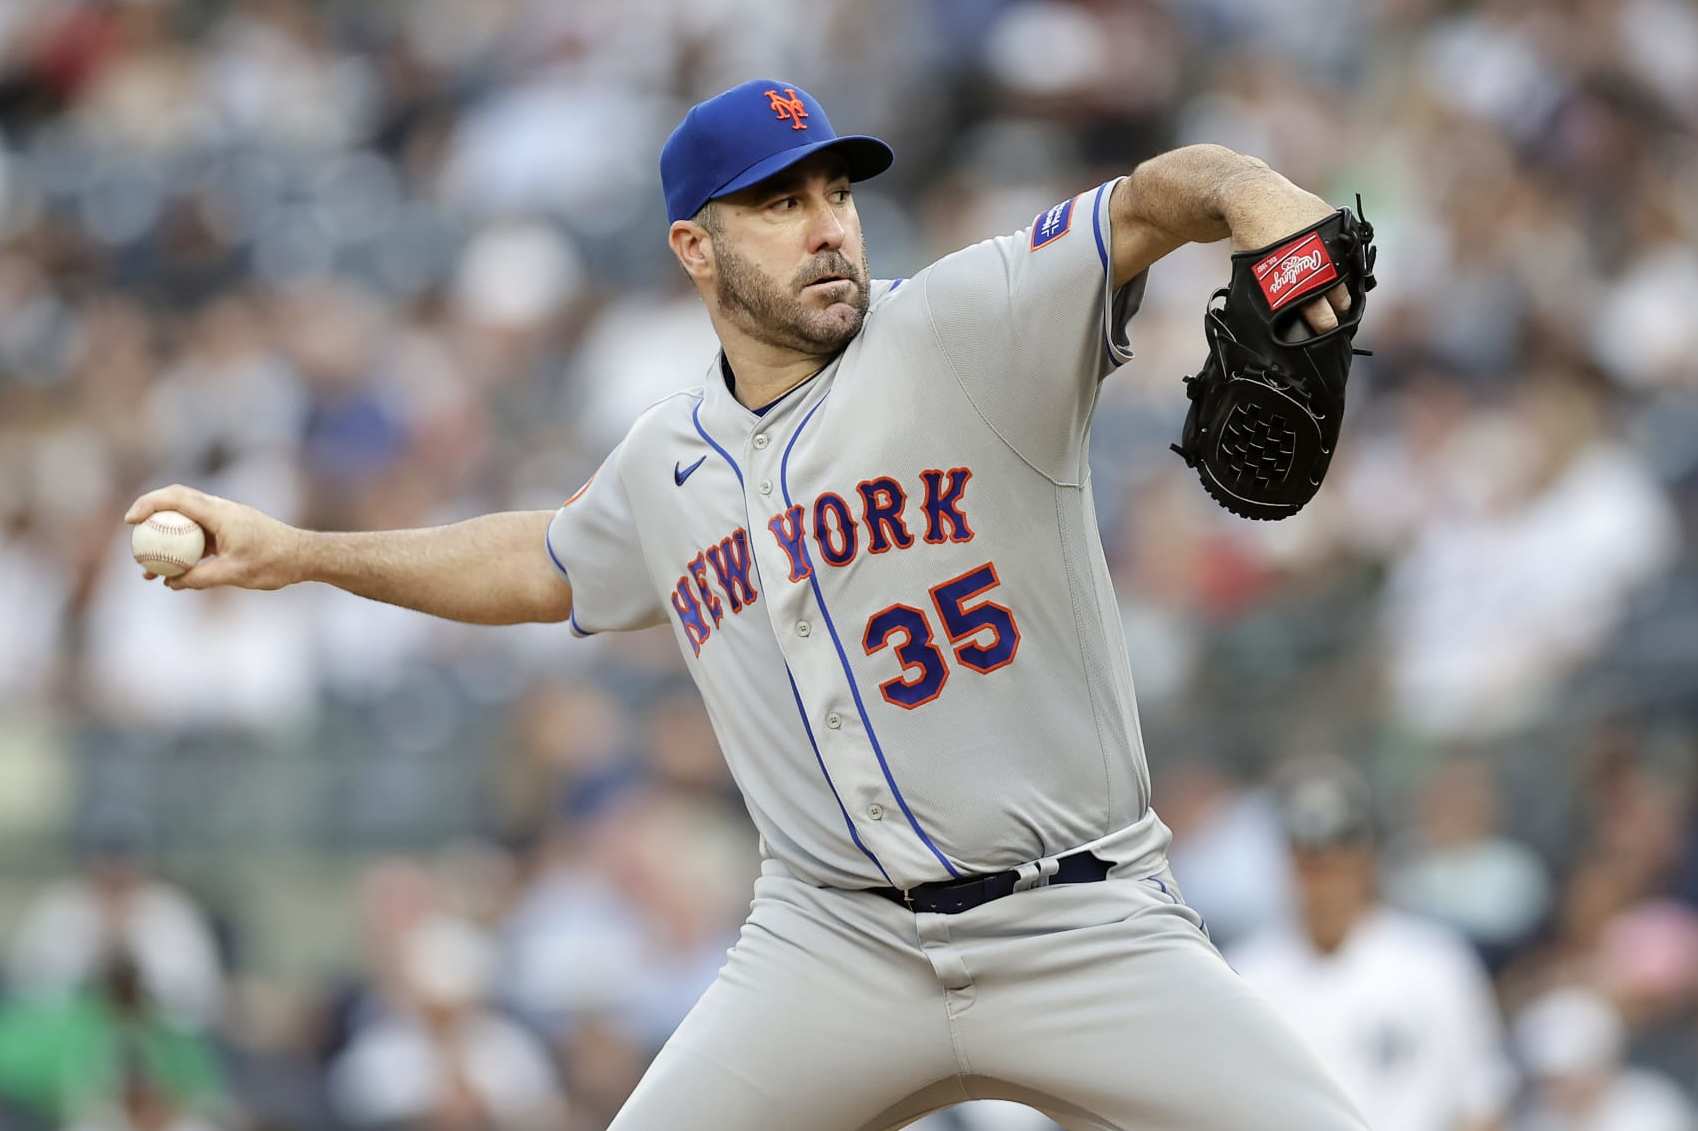 Report: Astros Acquire Justin Verlander in Blockbuster Trade With Mets, Sports-illustrated